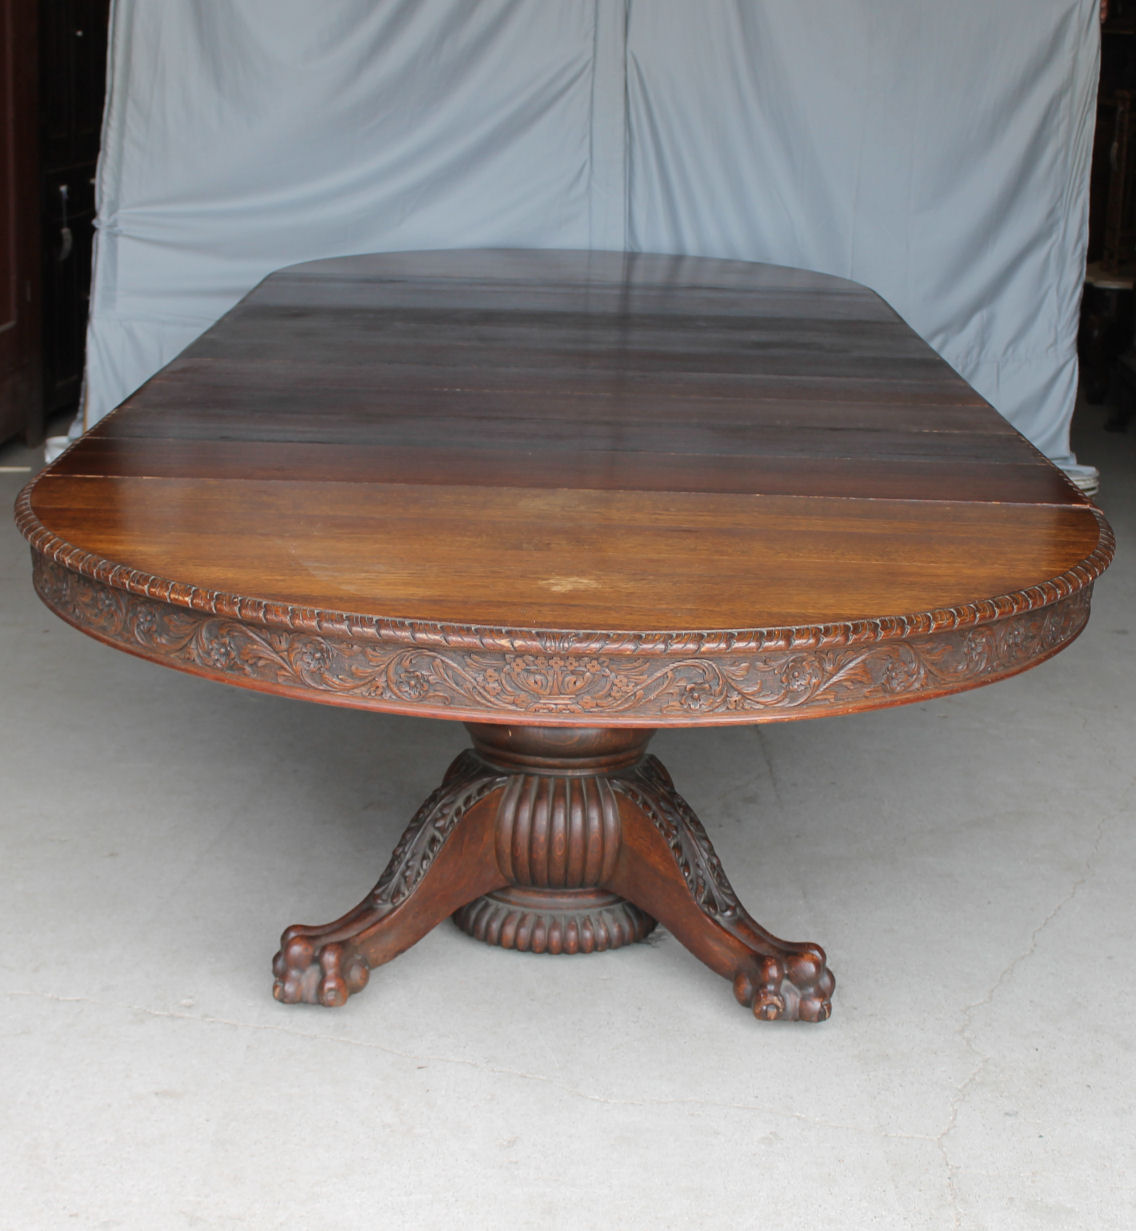 Round Oak Dining Table, Antique Round End Table With Claw Feet